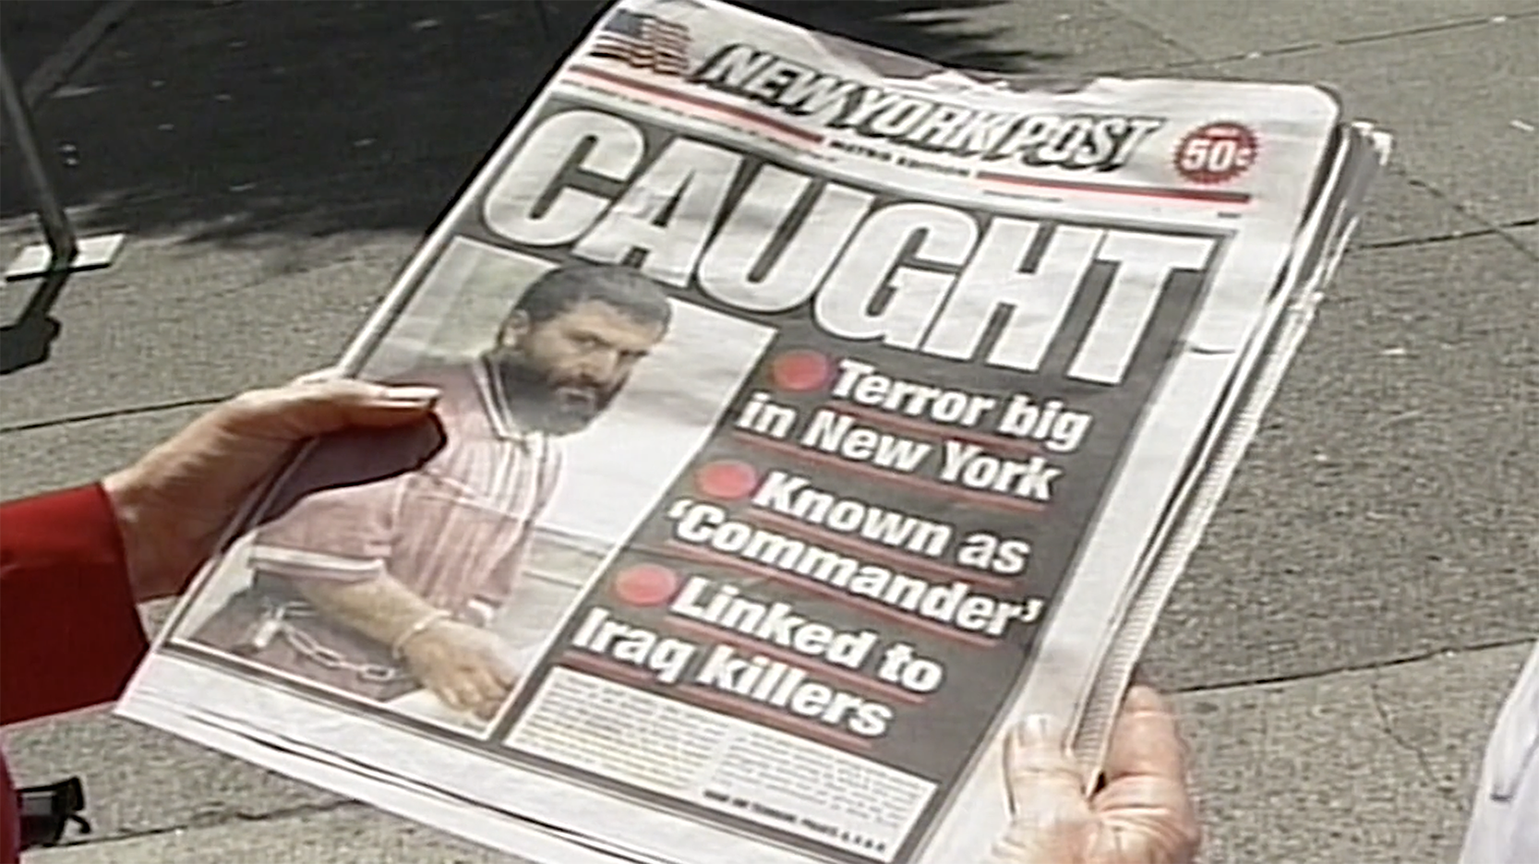 A new york post newspaper featuring the Commander, who is believed to be linked to Iraq killers.